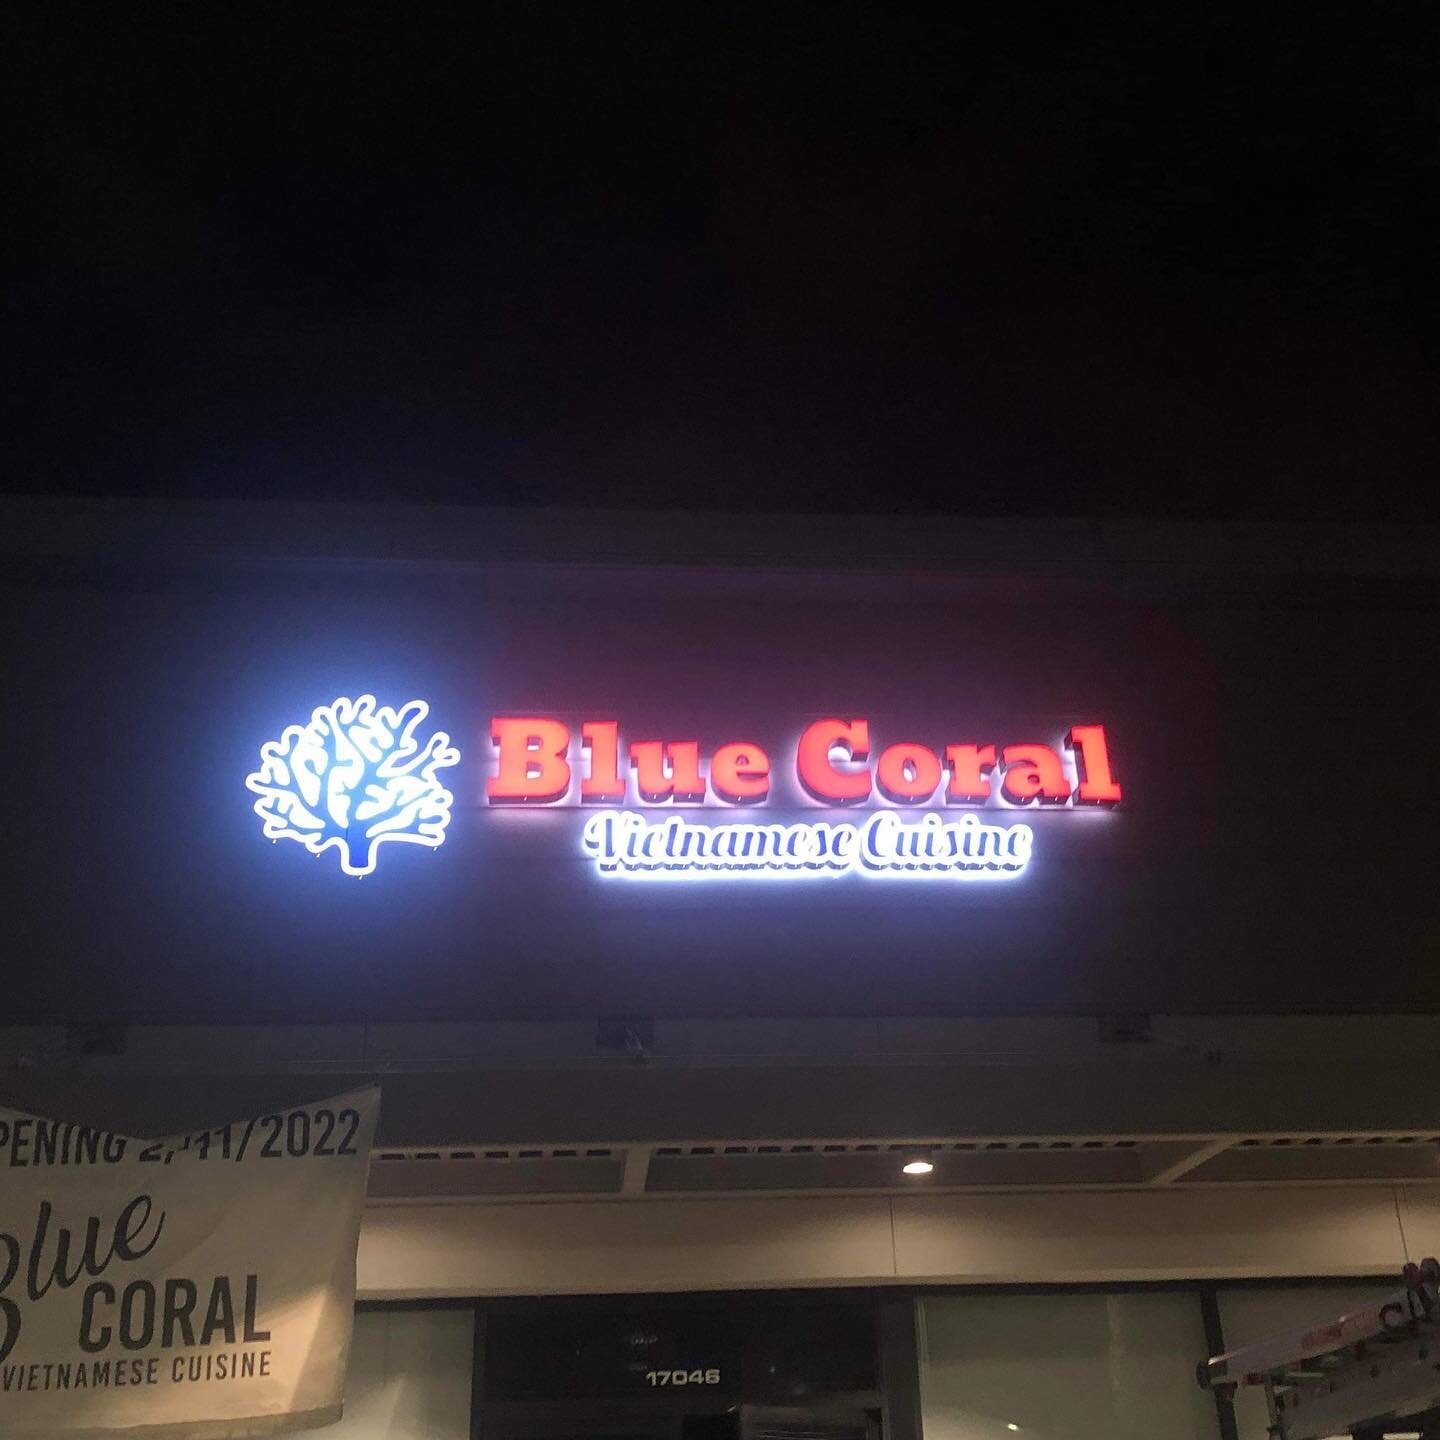 Installed this beautiful sign for Blue Coral restaurant in Fountain Valley. #phorestaurant #pholife🍜 #vietnamesecuisine #fountainvalley #exteriorsign